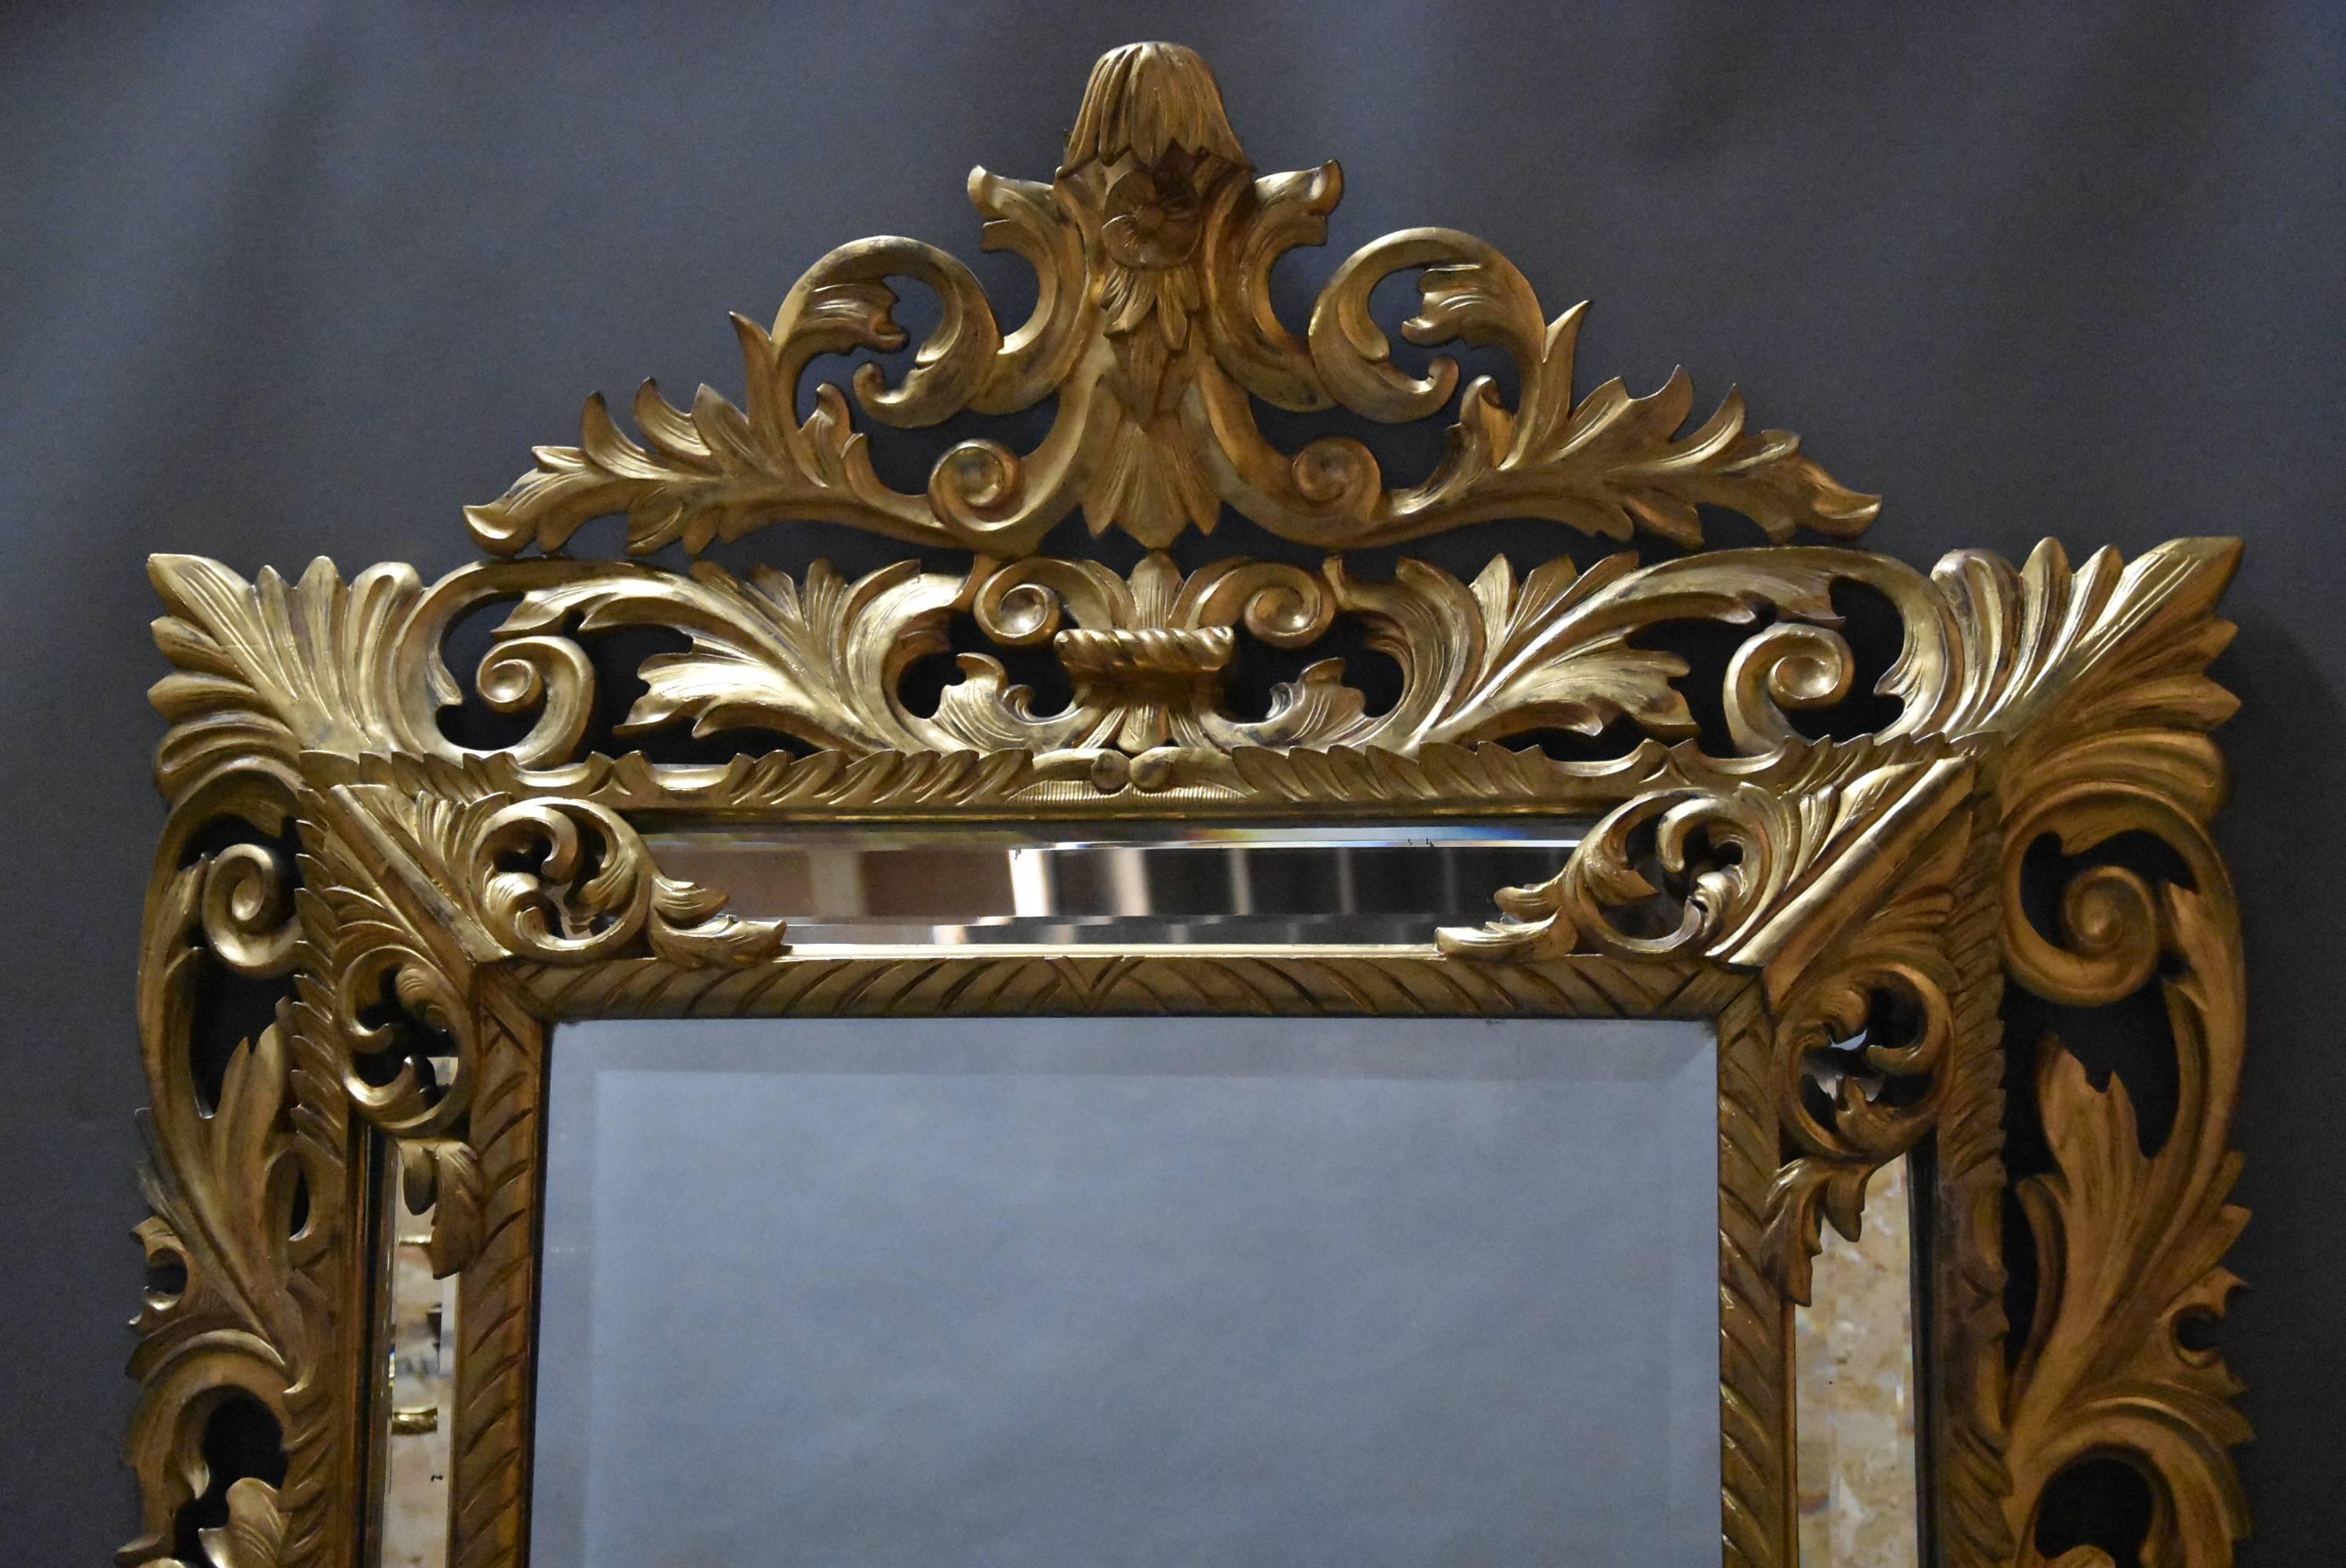 Late 19th Century Large 19th Century Italian 'Florentine' Superbly Carved Giltwood Cushion Mirror For Sale